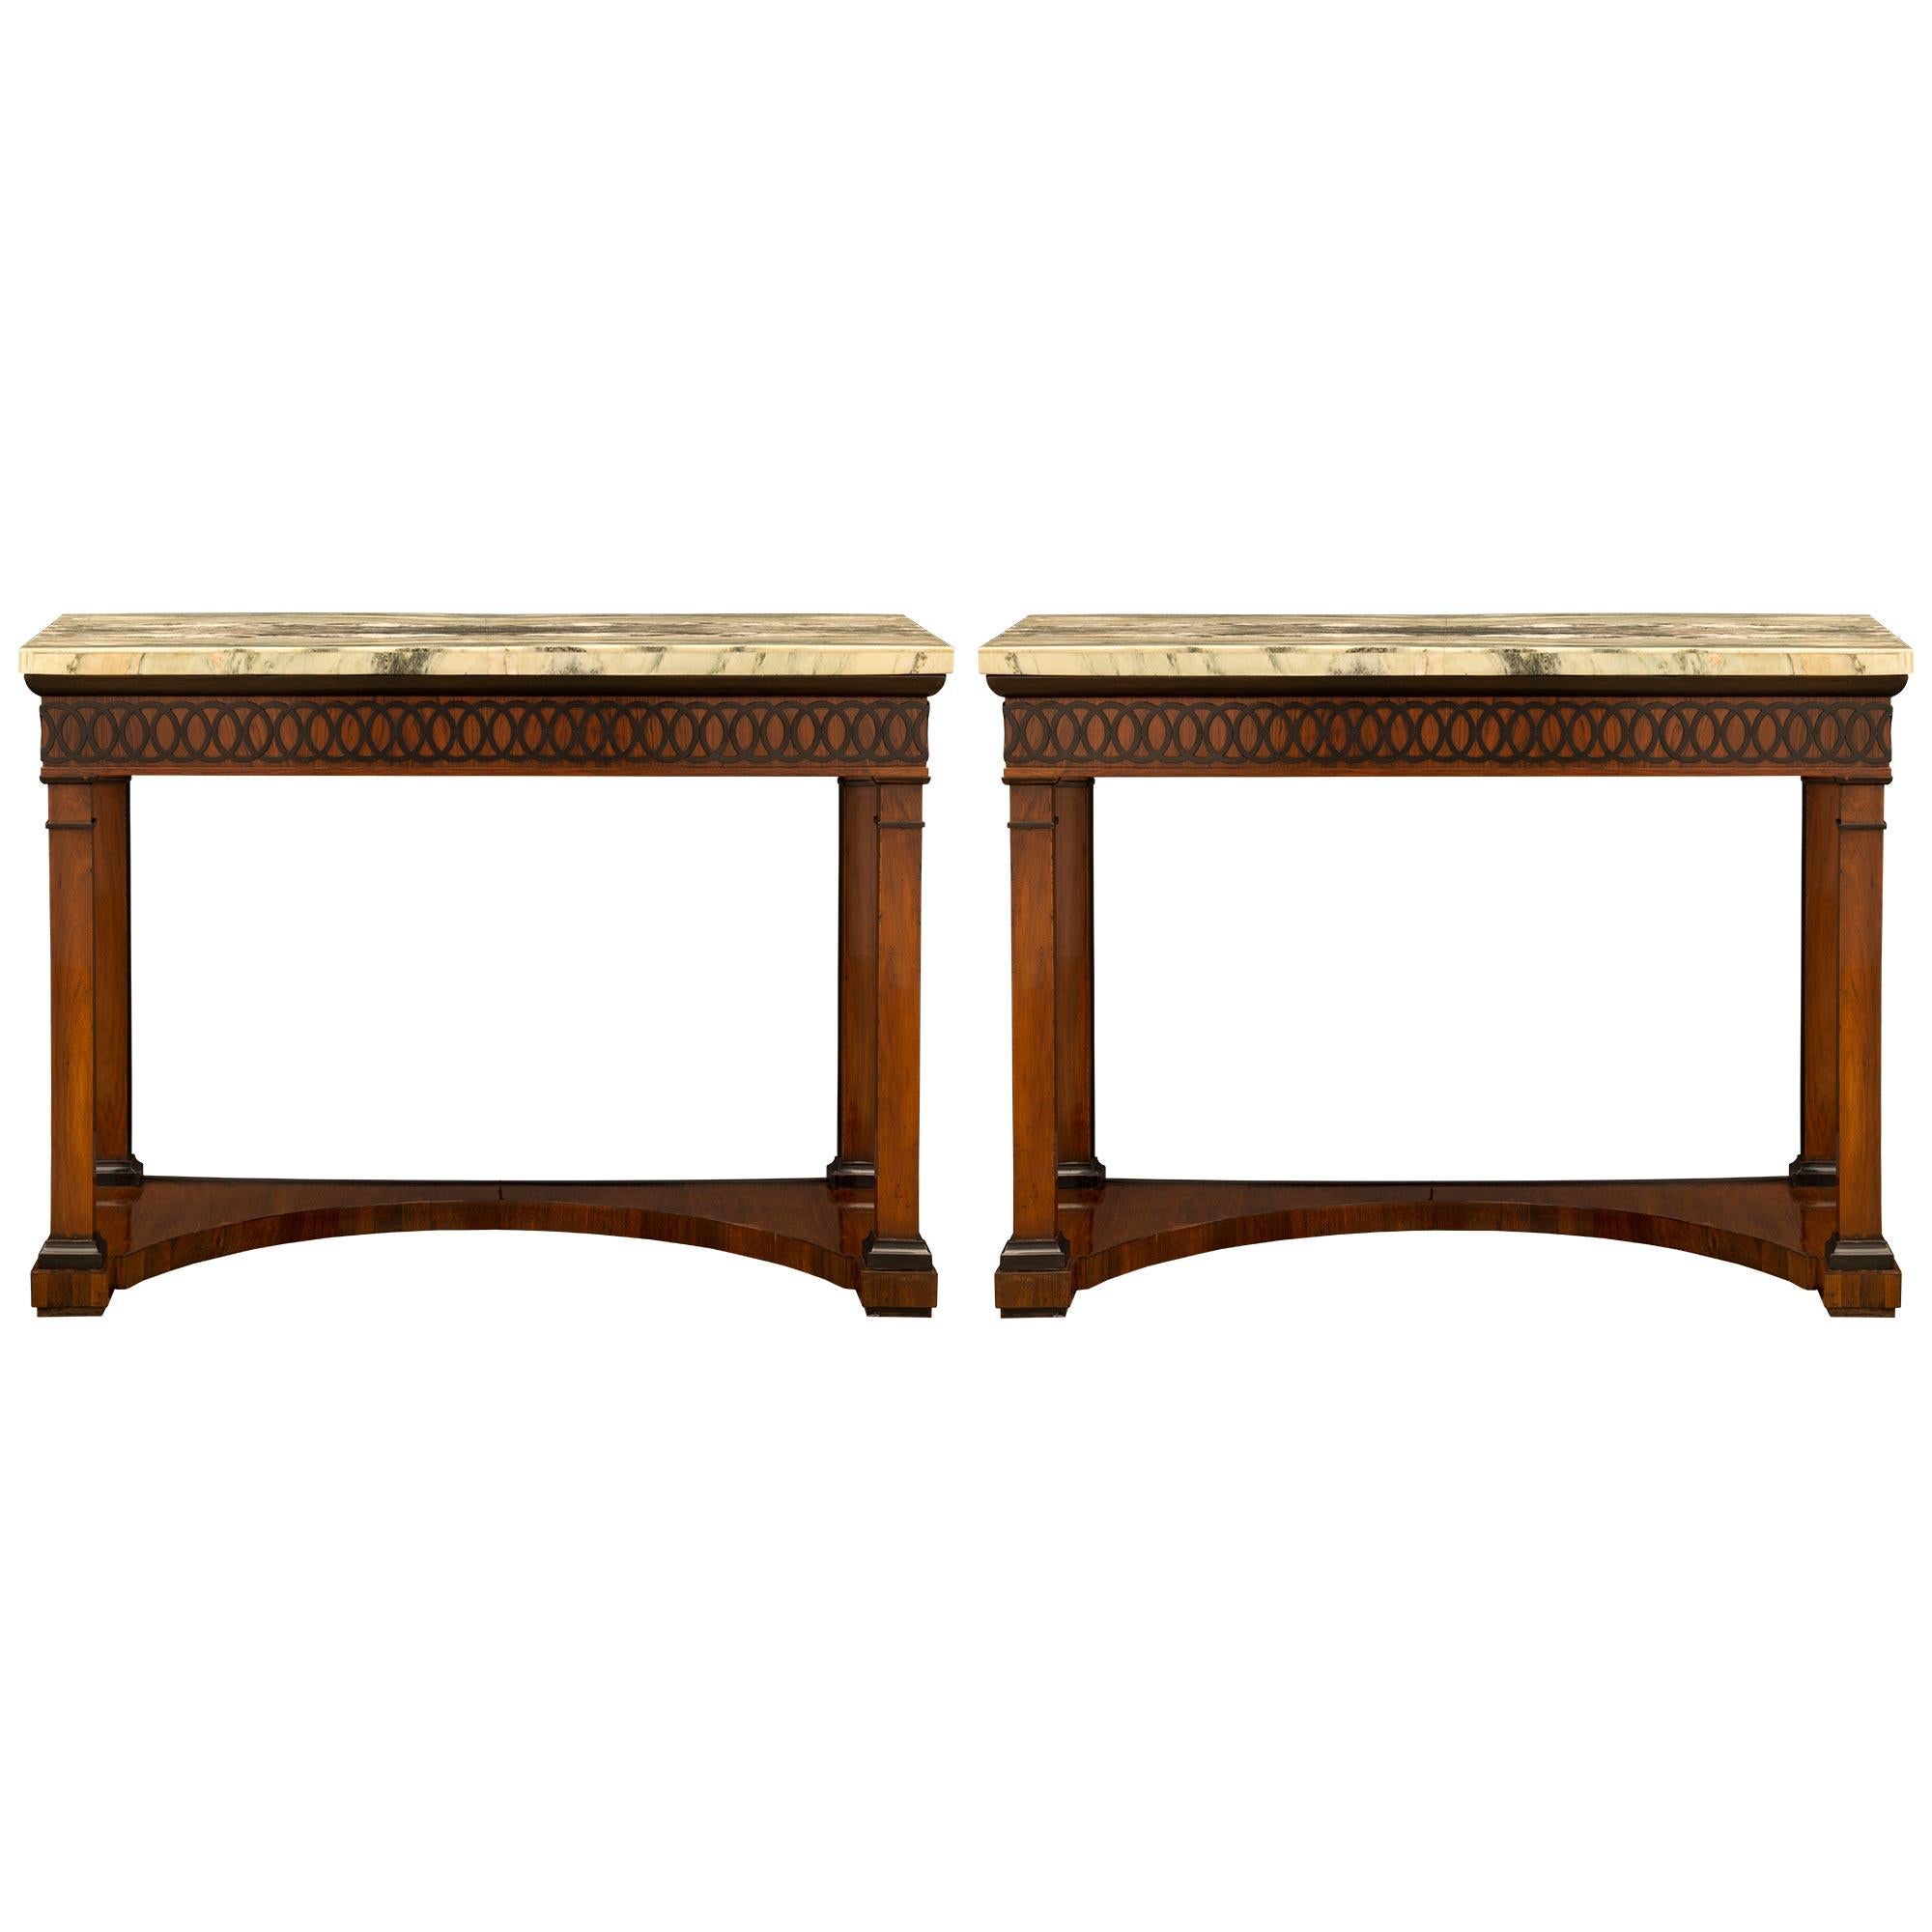 Pair of Italian Early 19th Century Walnut Consoles For Sale